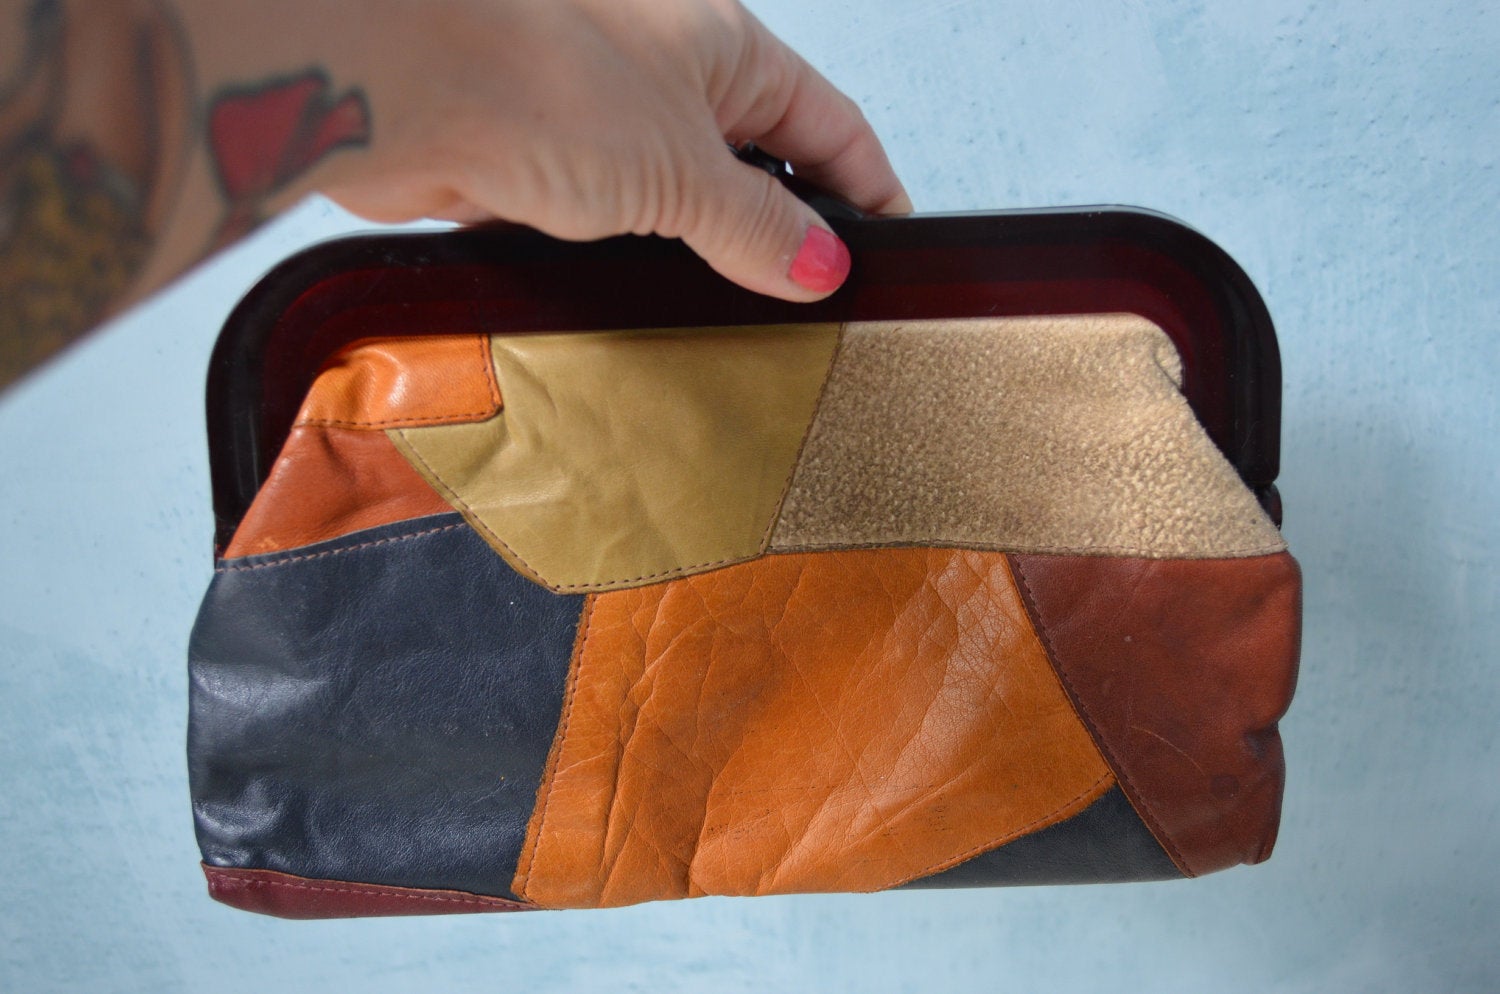 70S Patchwork Boho Chic Woodstock Leather Clutch Bohemian Bag Style